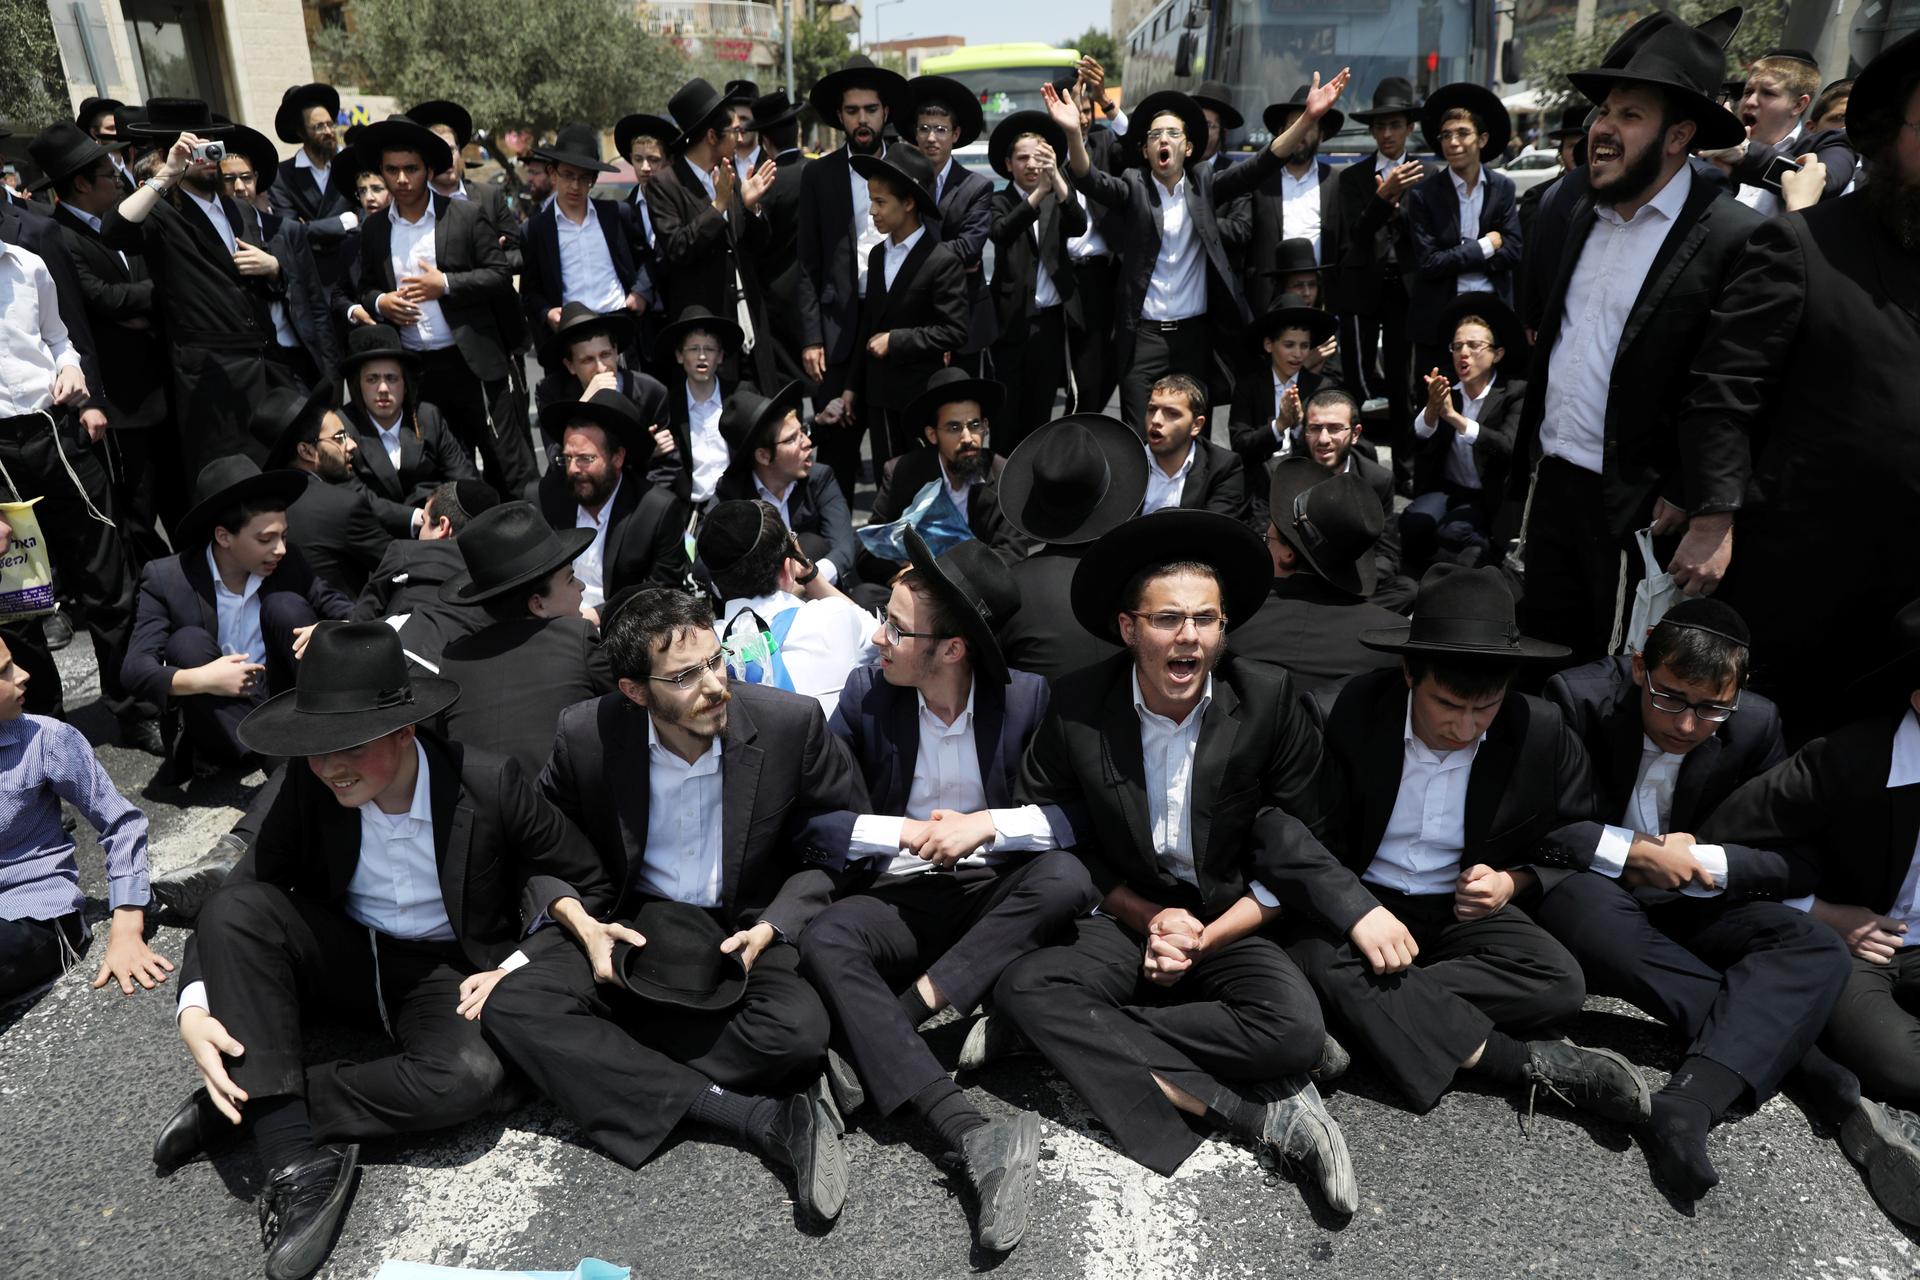 many Ultra-Orthodox Jewish men sit on the ground, linking arms